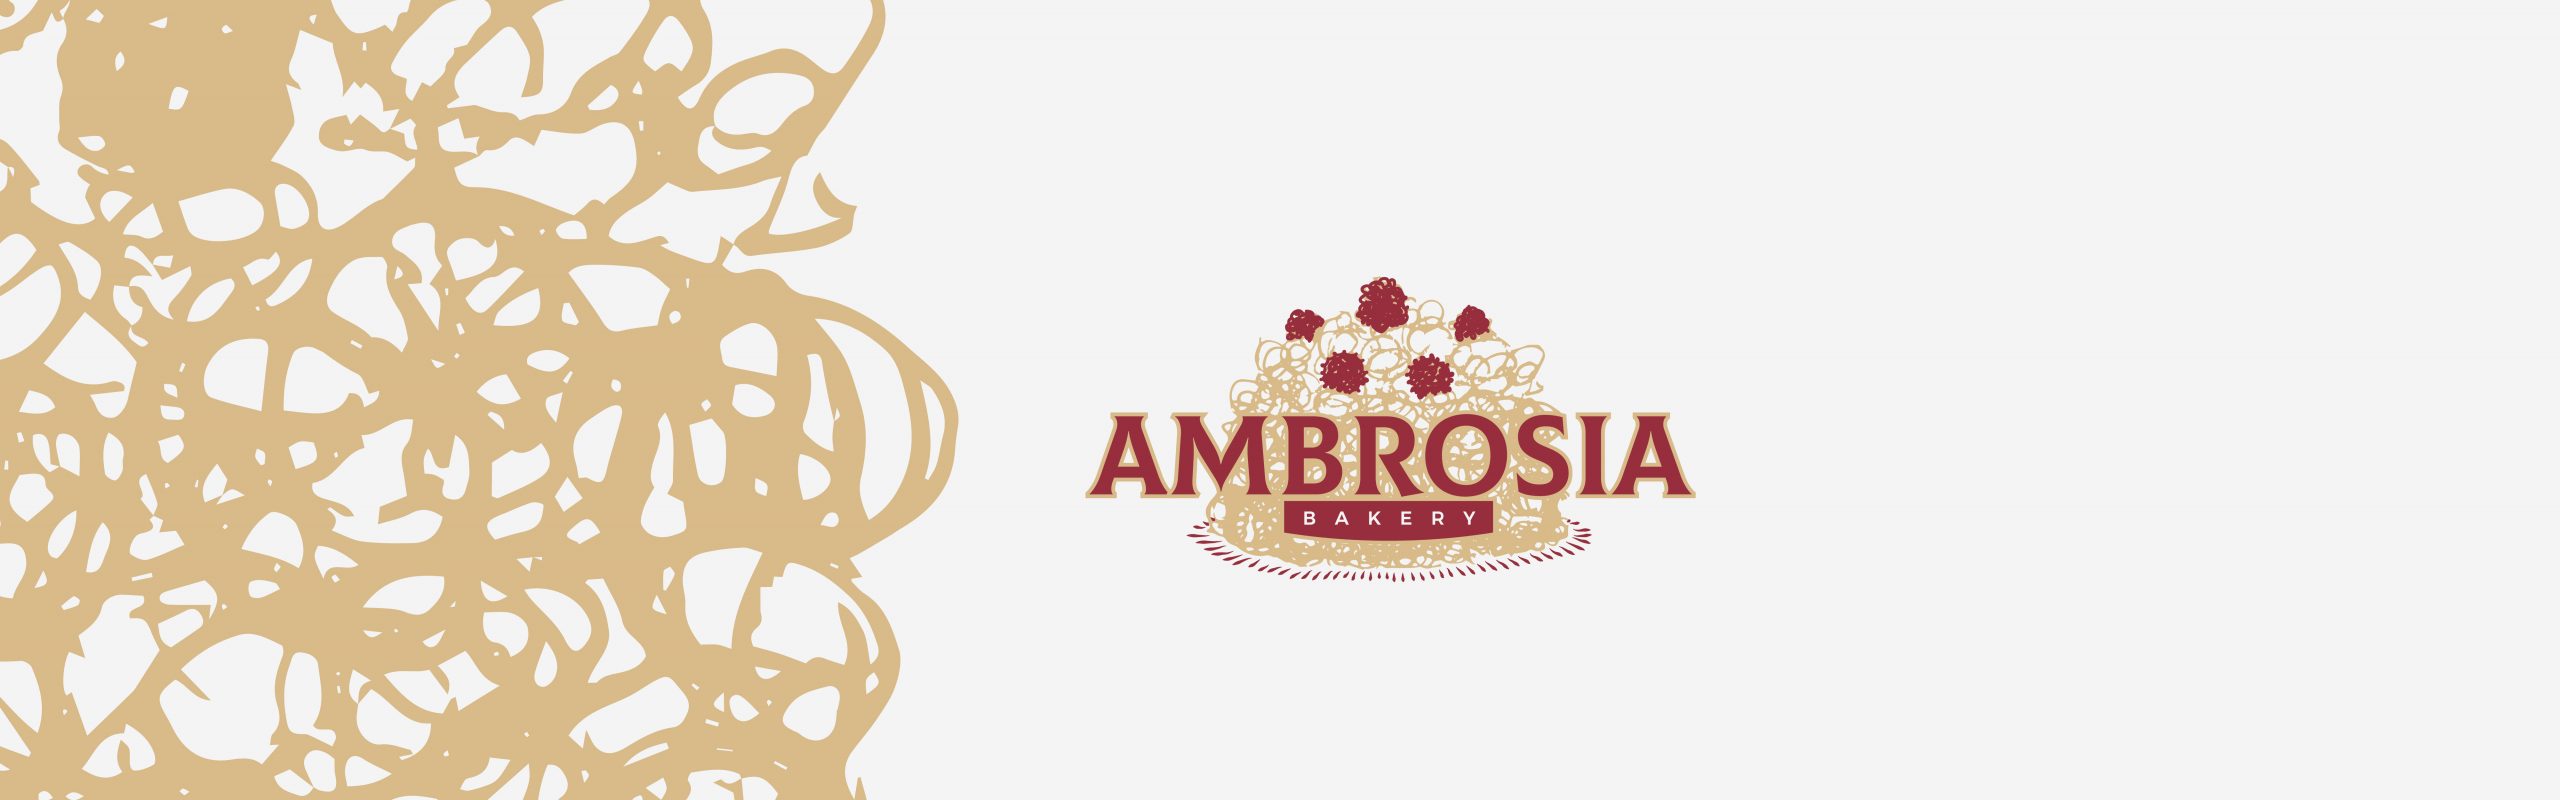 A logo for Ambrosia Bakery featuring stylized text and an illustration of what appears to be raspberries, set against a cream-colored background with an ornate, lace-like pattern.